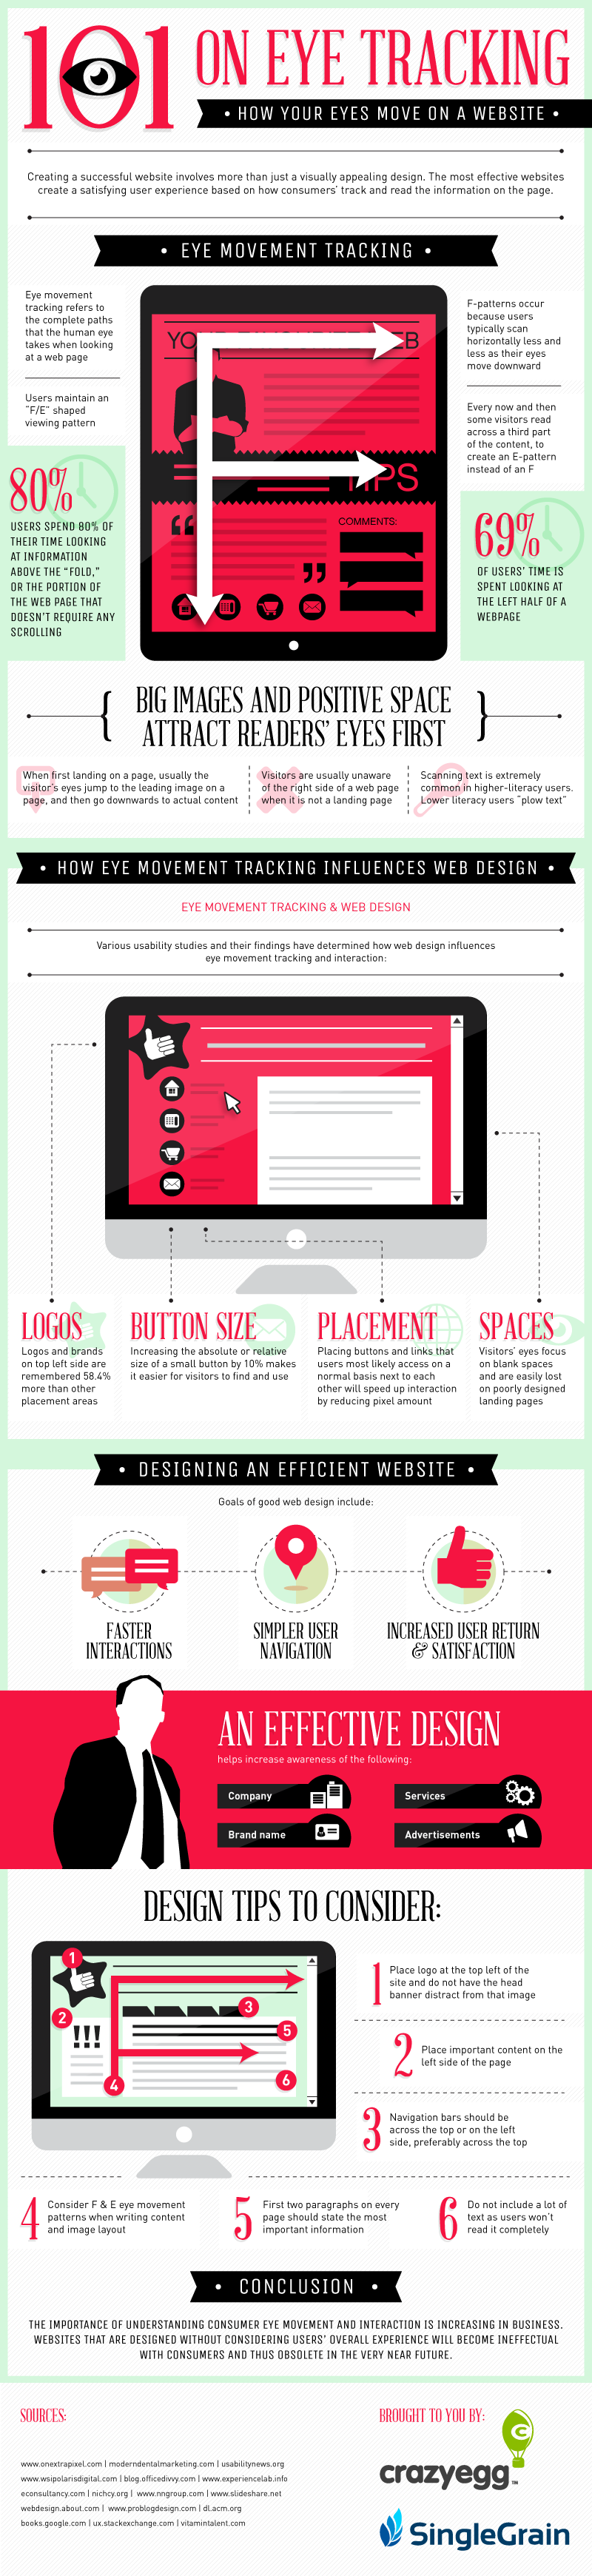 101-on-eye-tracking-how-your-eyes-move-on-a-website-infographic-internet-marketing-with-blog-optimization